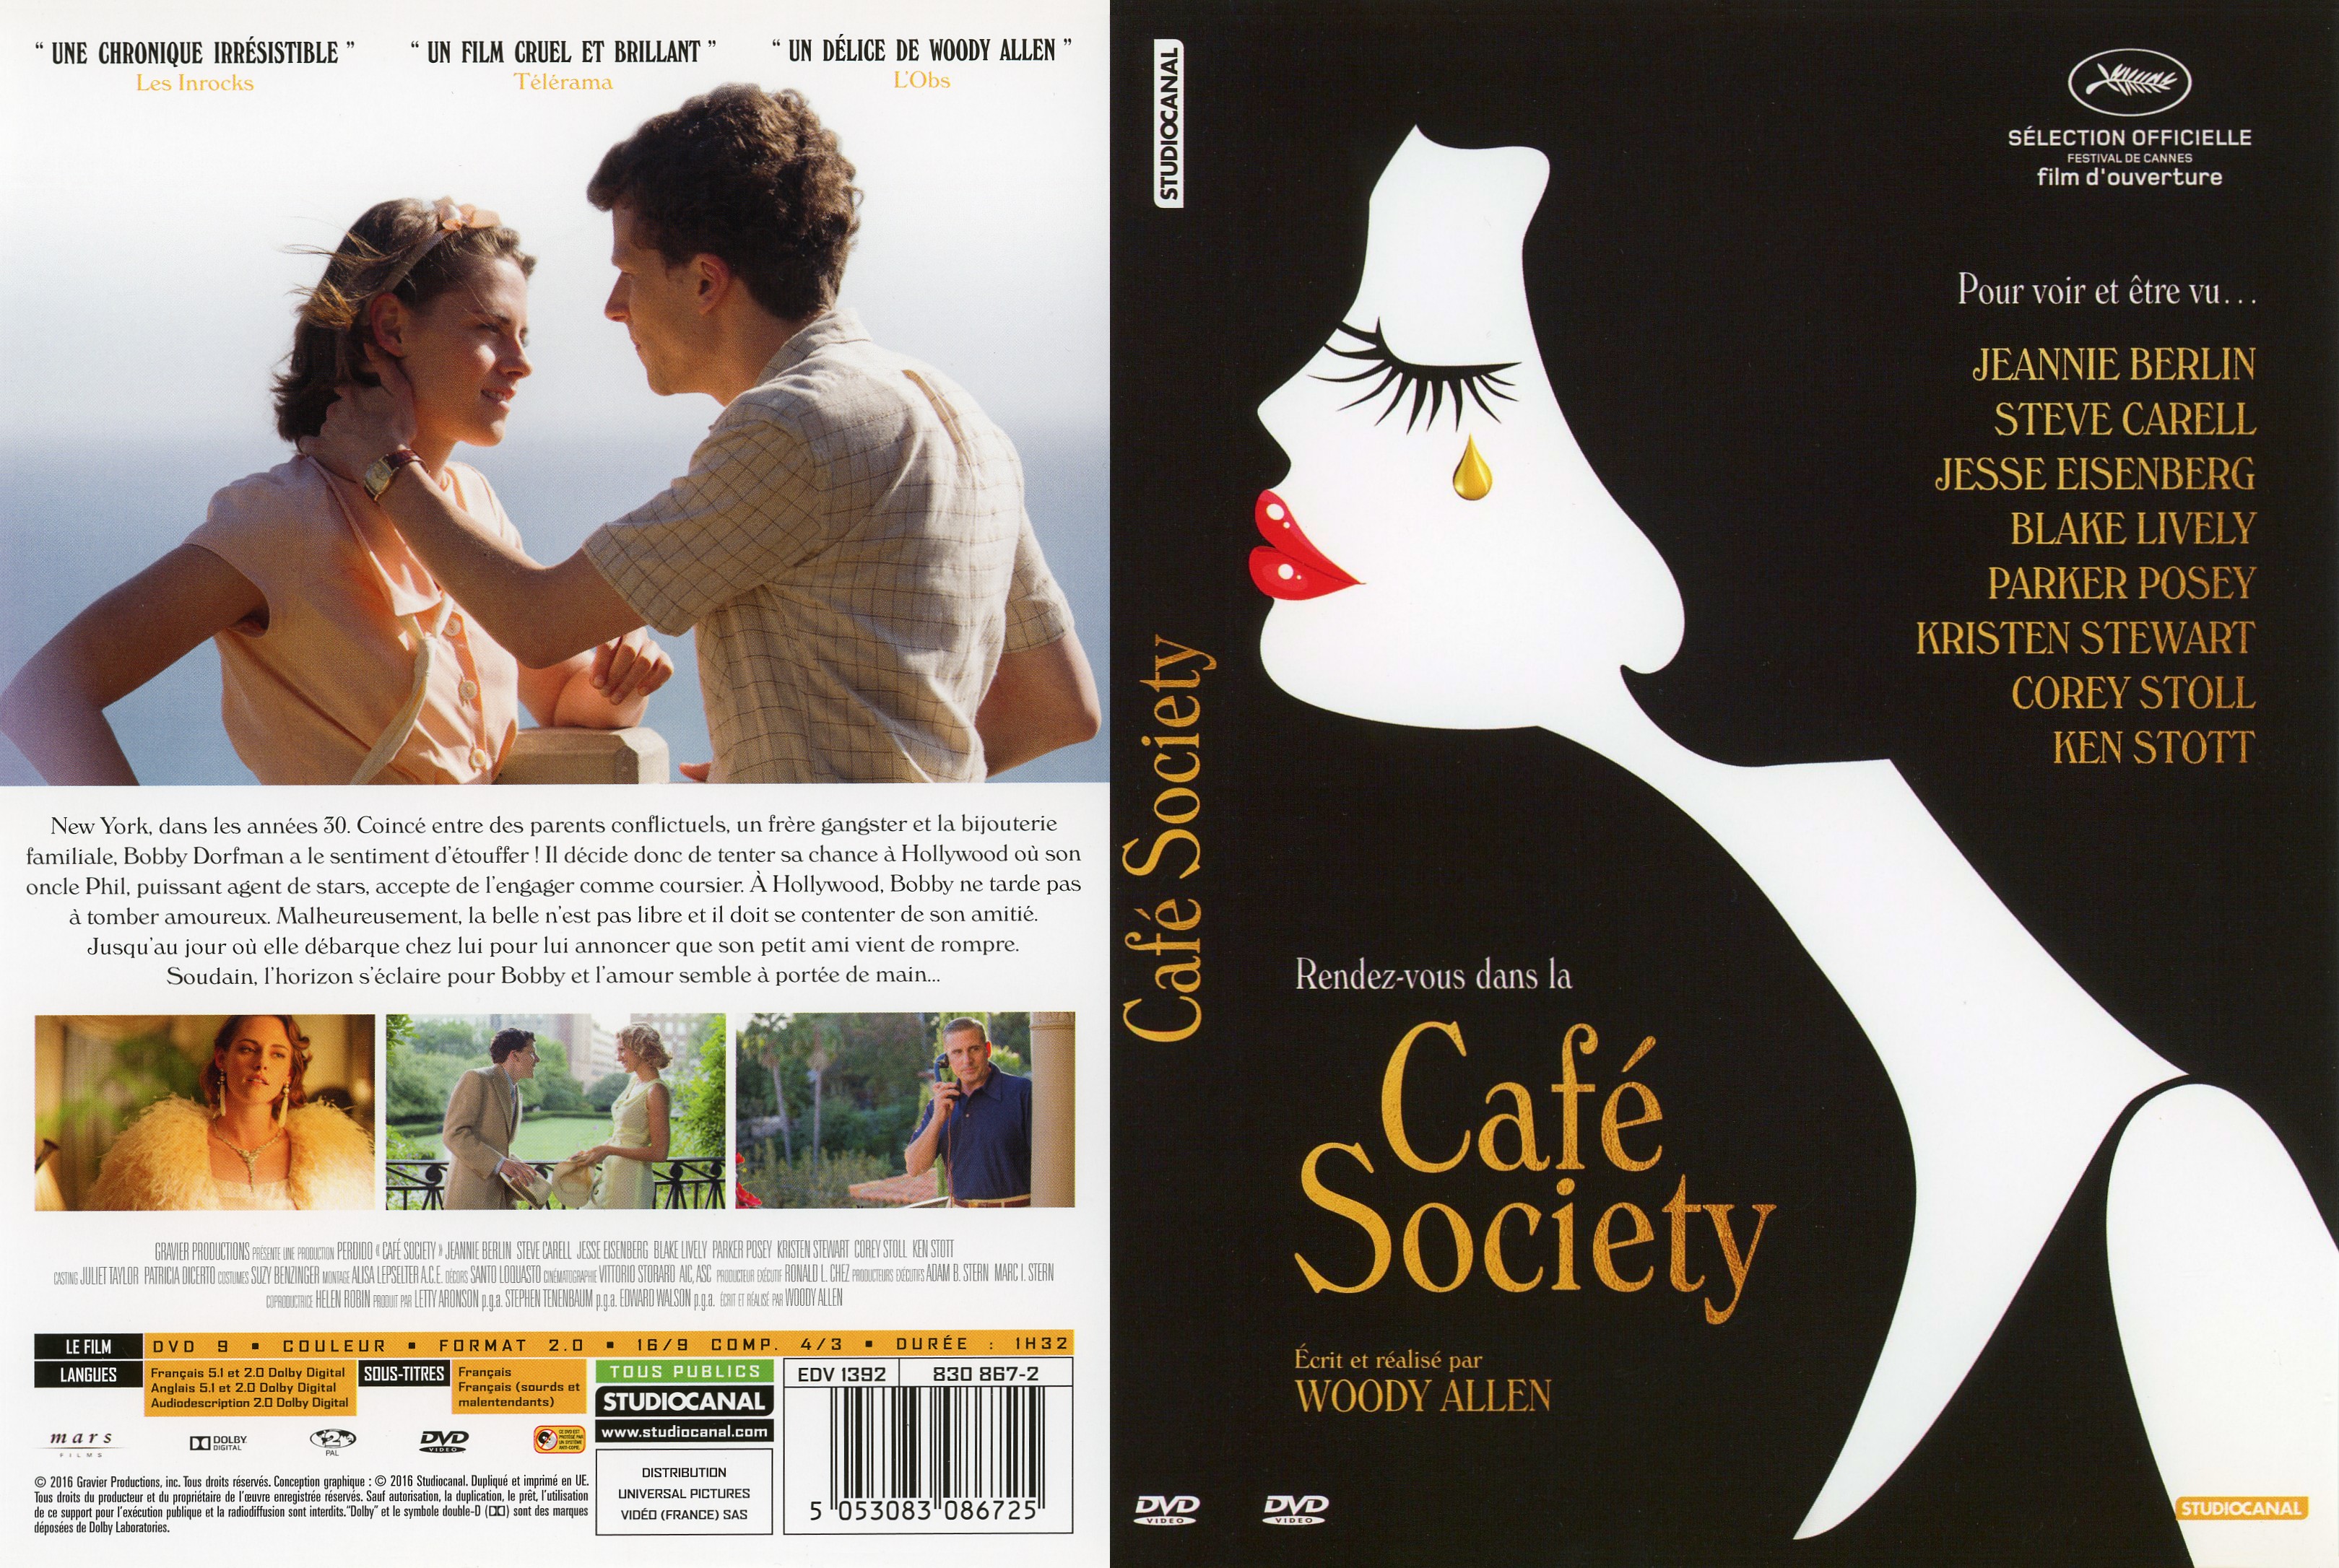 Jaquette DVD Cafe Society